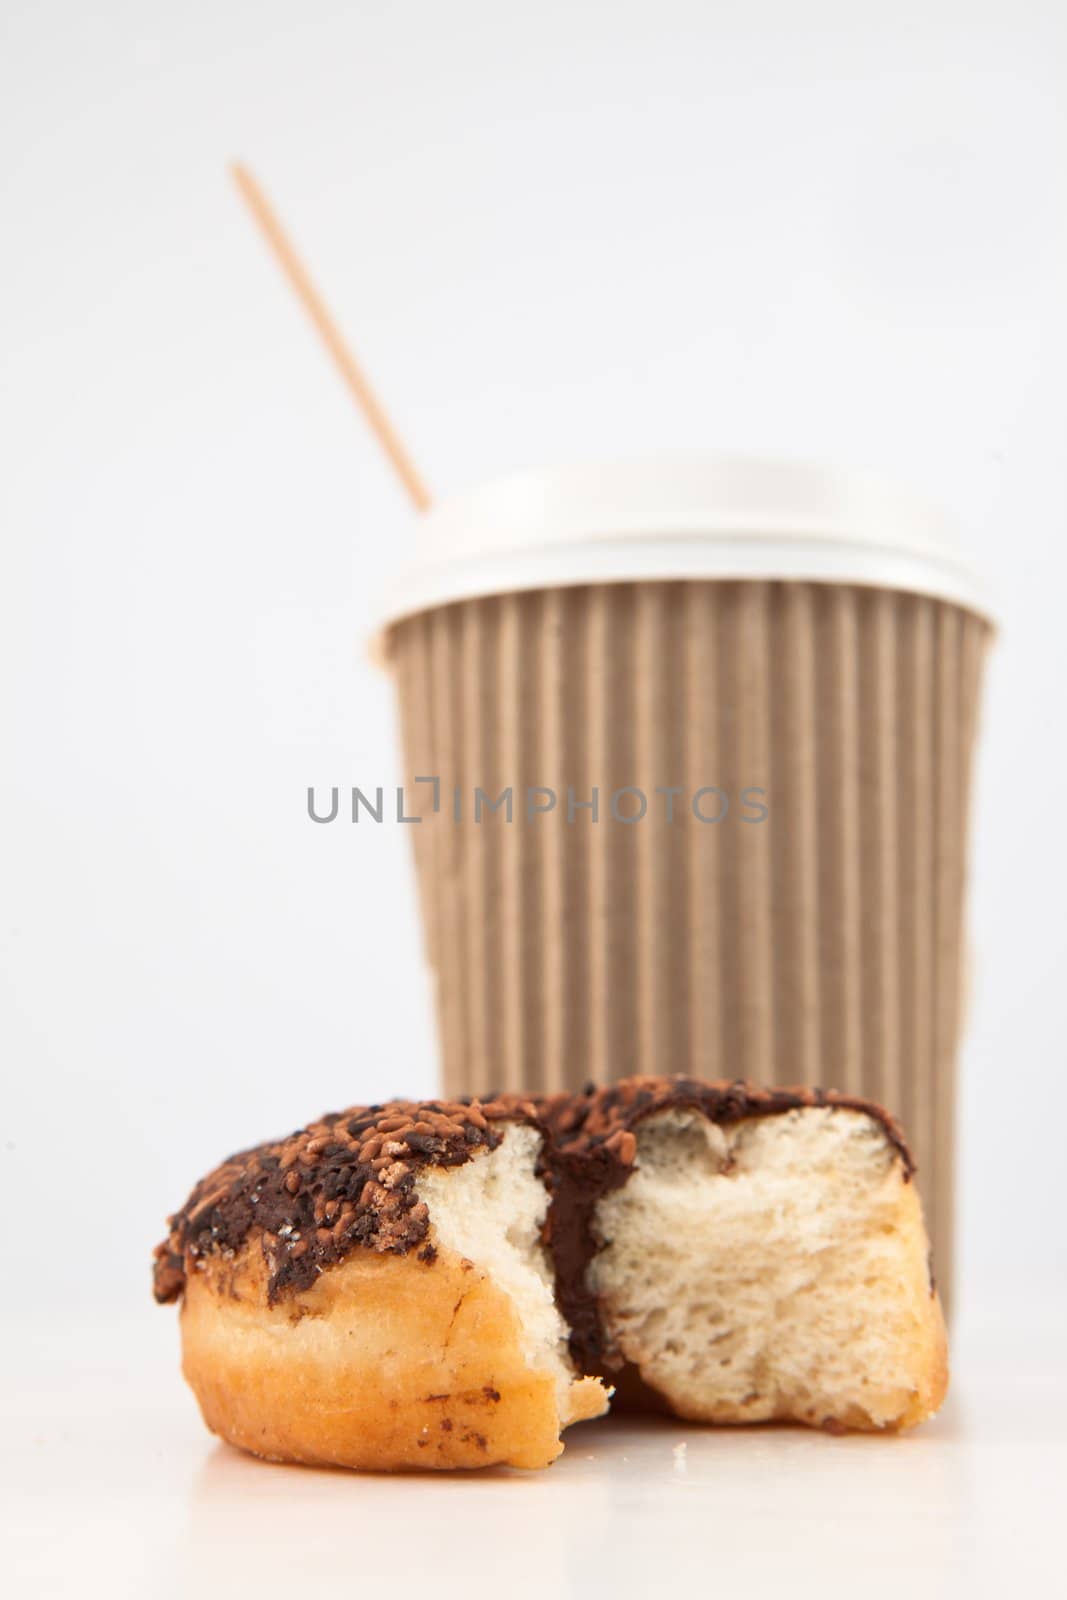 An half eaten doughnut and a cup of coffee placed together against a white background